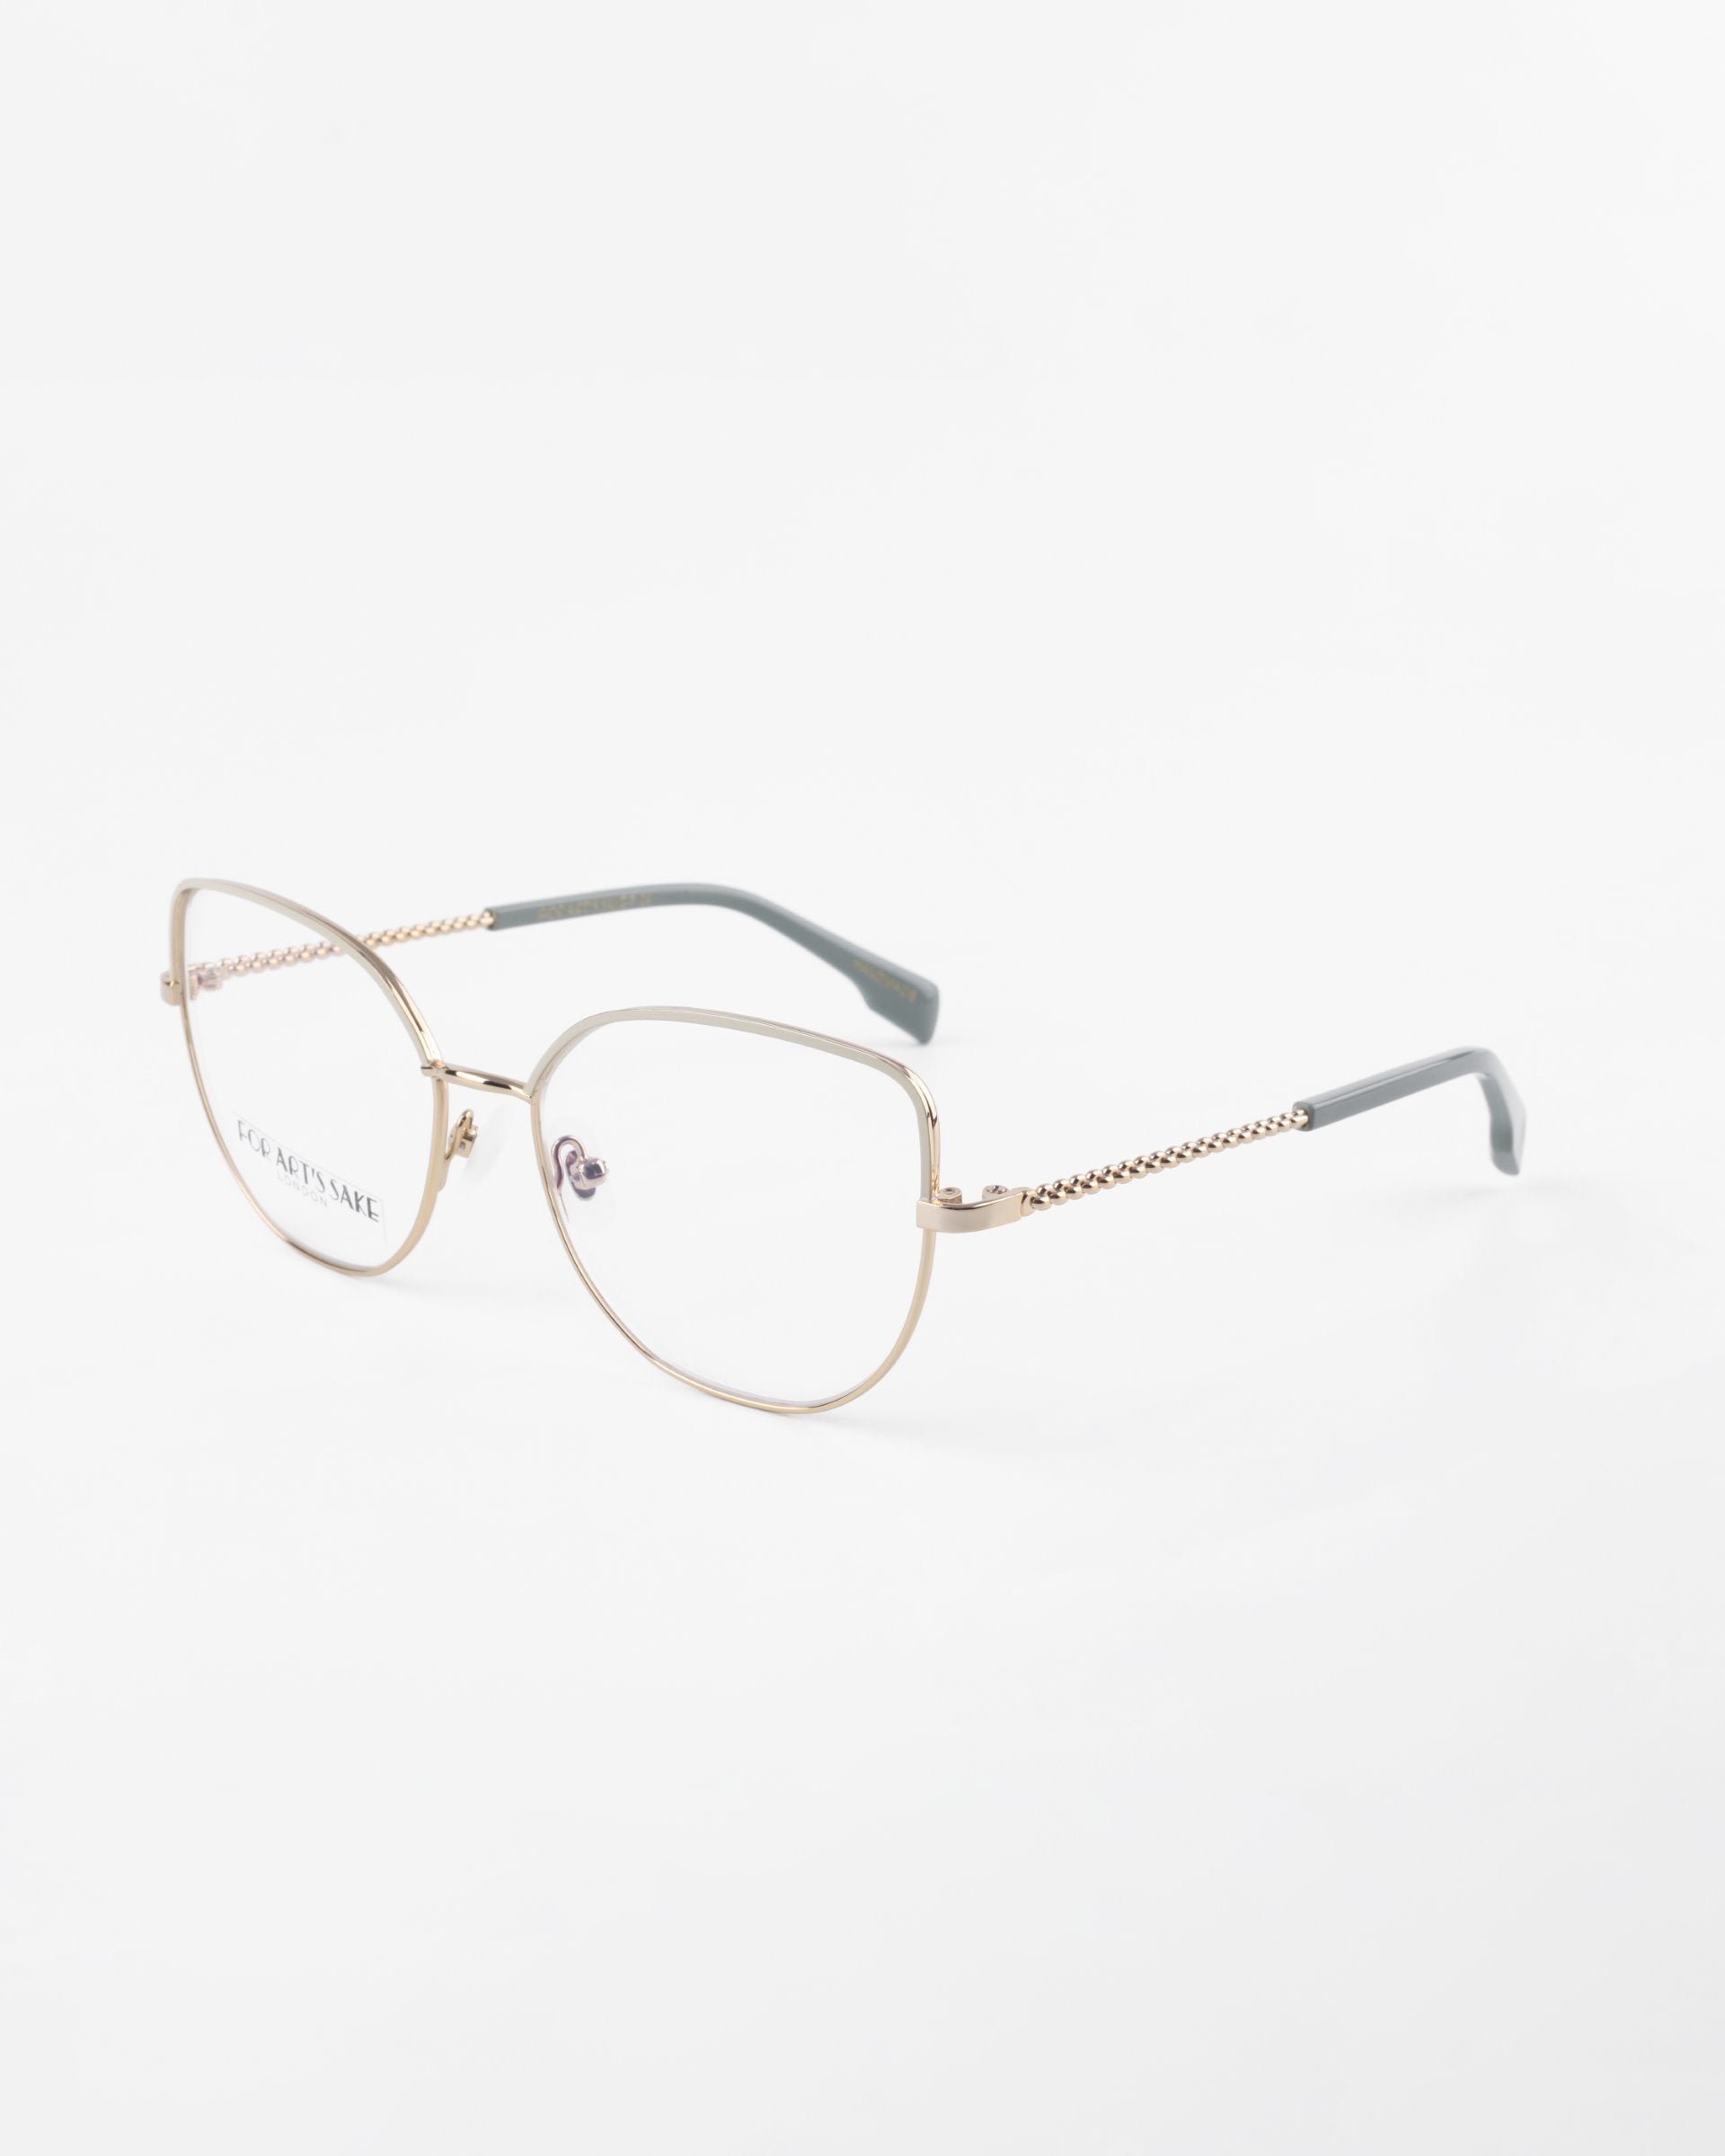 A pair of stylish For Art's Sake® Ophelia eyeglasses with thin, metallic gold frames and clear lenses. The arms of the glasses are gray and feature a subtle braided design near the hinges. The white background highlights the elegant and minimalist design of the eyewear, which also offers a blue light filter option for added protection.